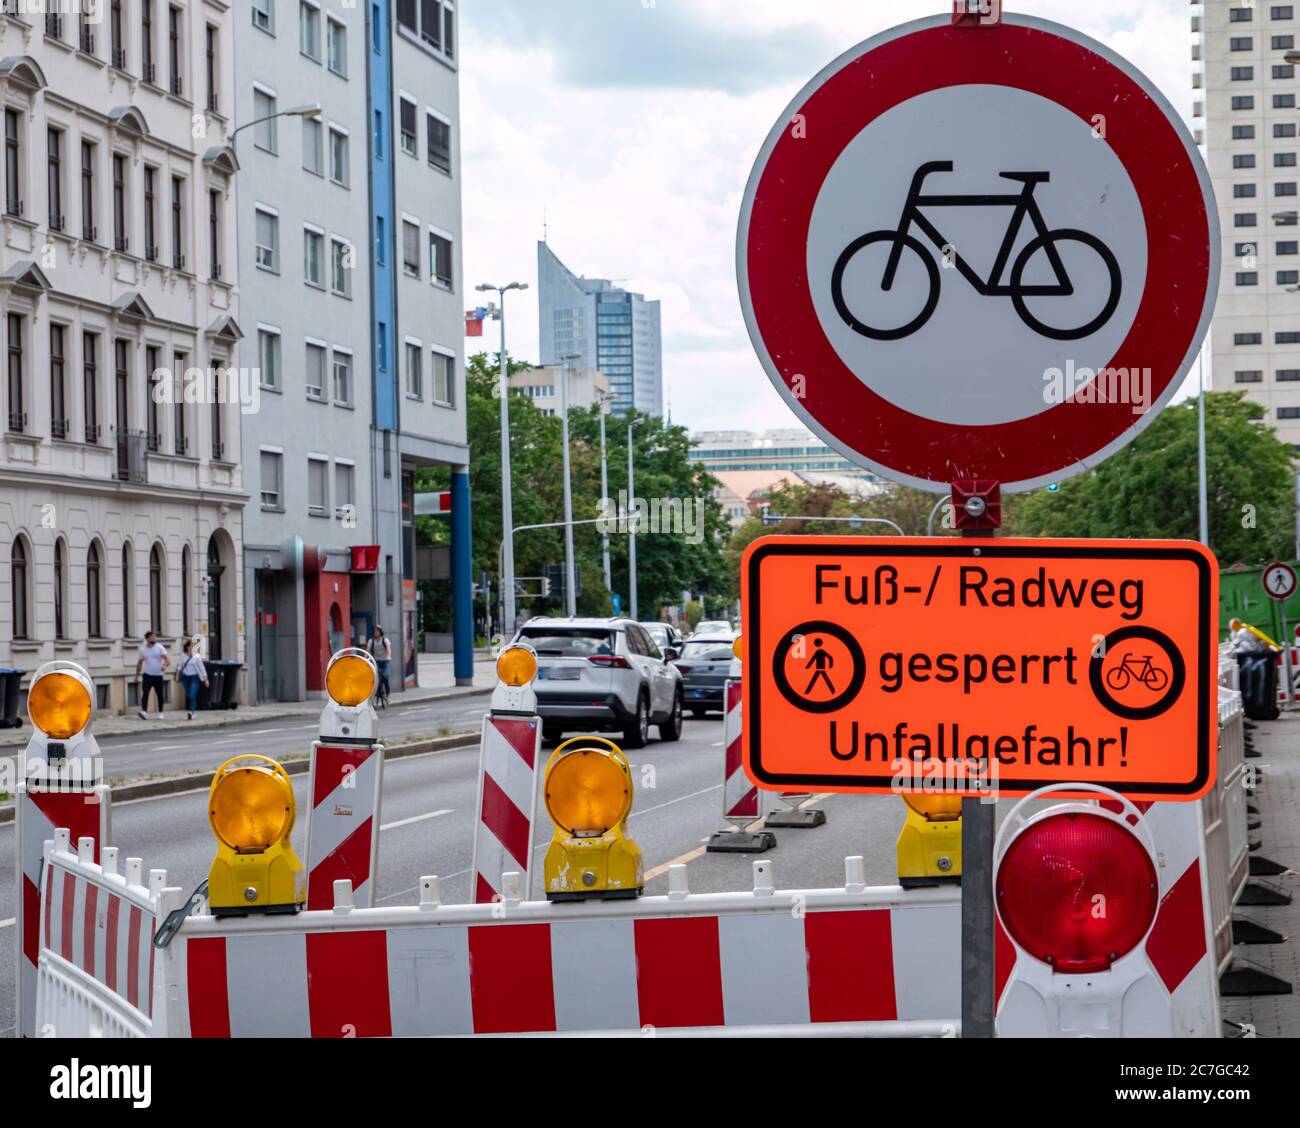 Warning foot and bike path blocked traffic sign in german Stock Photo